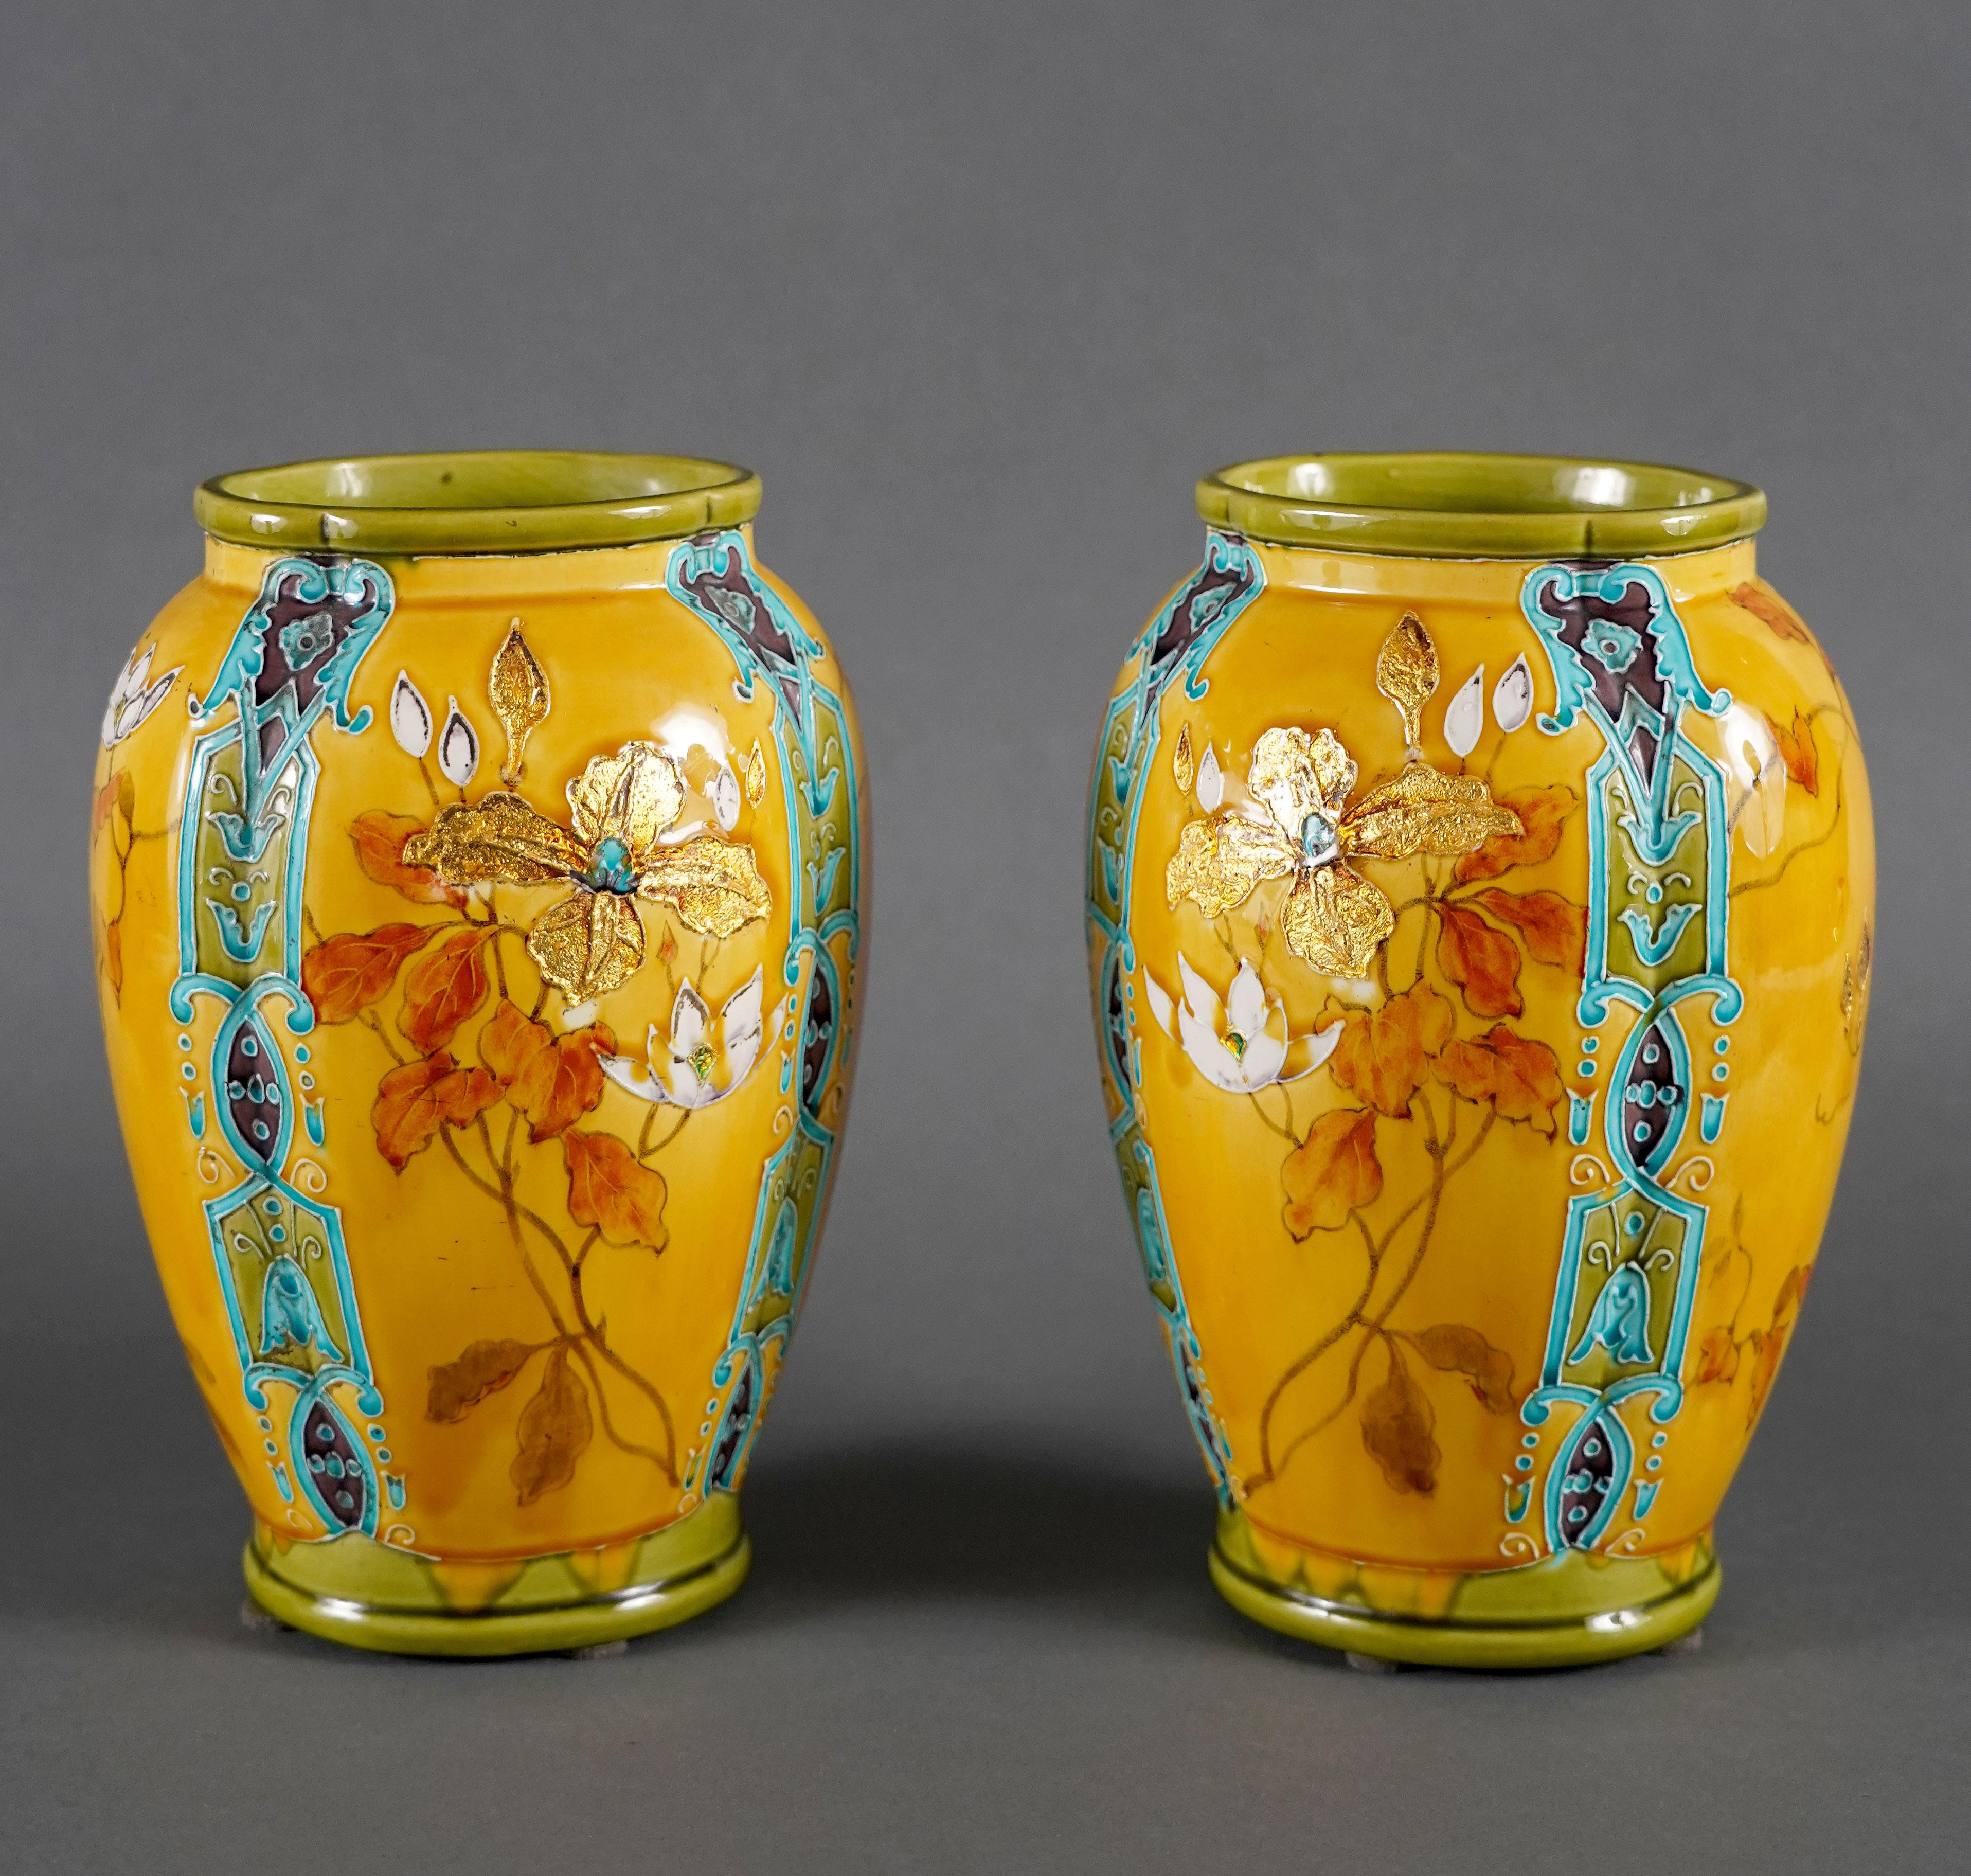 
A charming pair of polychrome earthenware vases with gold-leaf interleaving, a technique in which Théodore Deck had become a specialist.
These oblong-shaped vases are decorated on each side with bouquets of iris and cyclamen on an orange-brown